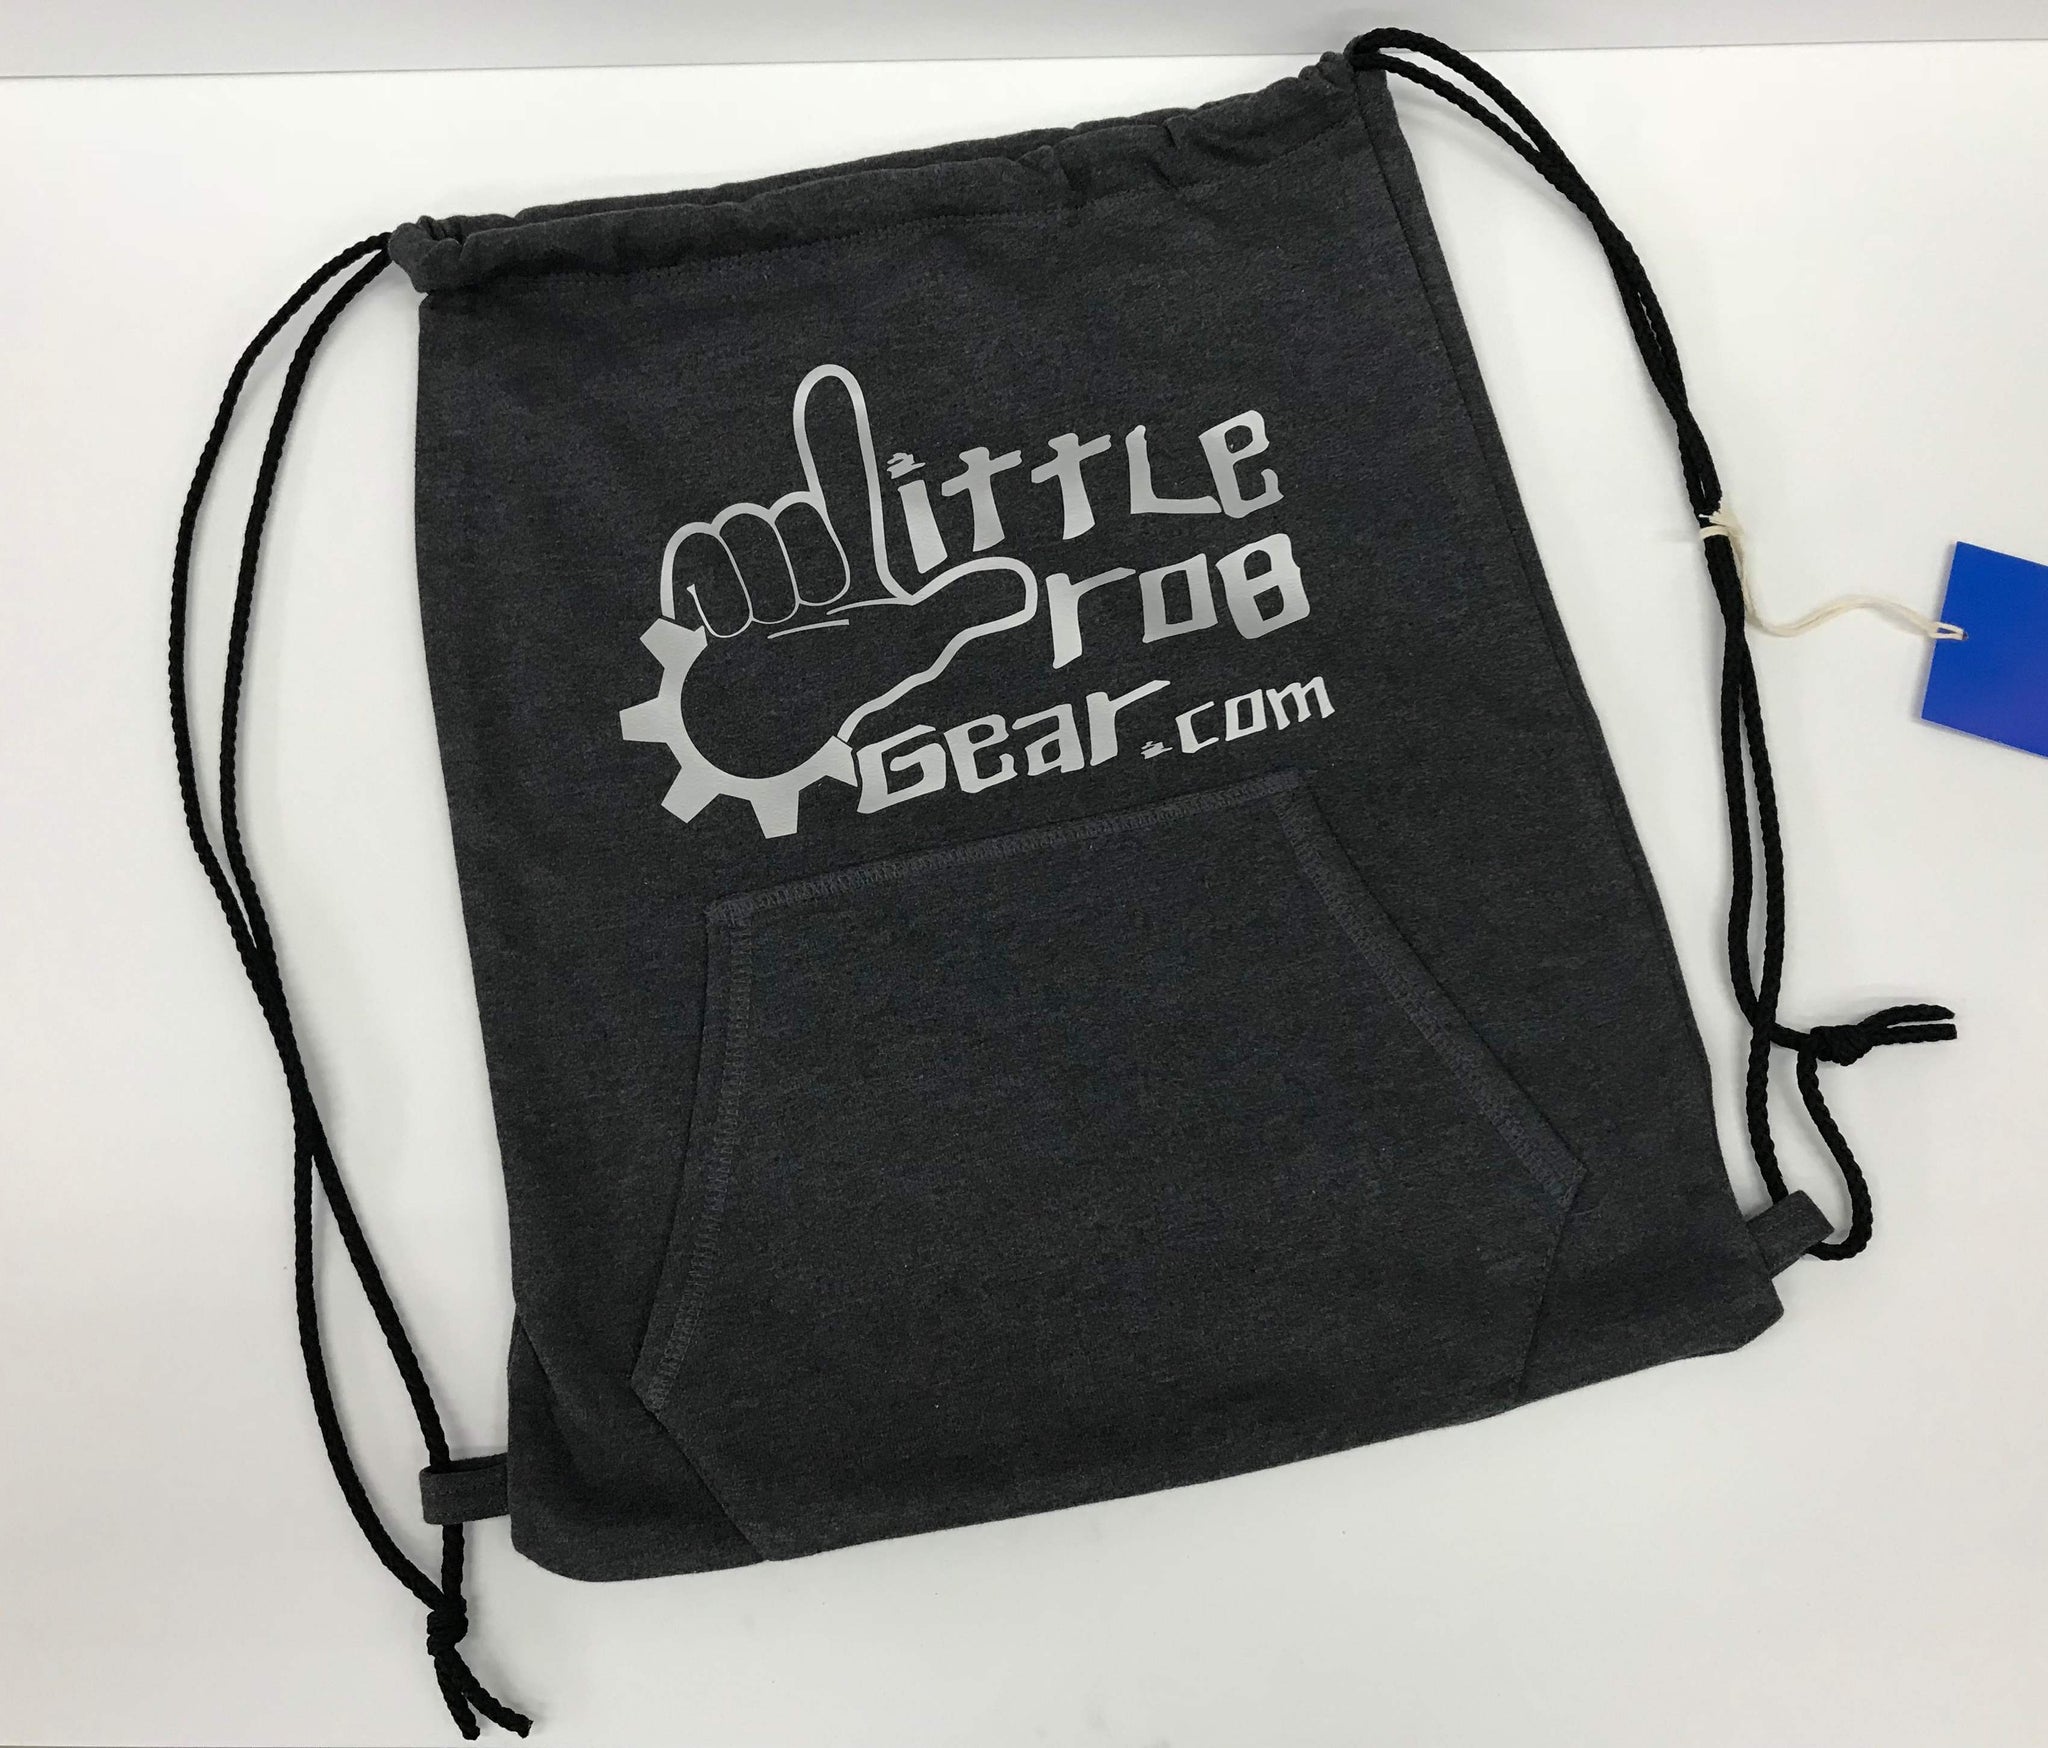 Little Rob black drawstring backpack - made of hoodie material!